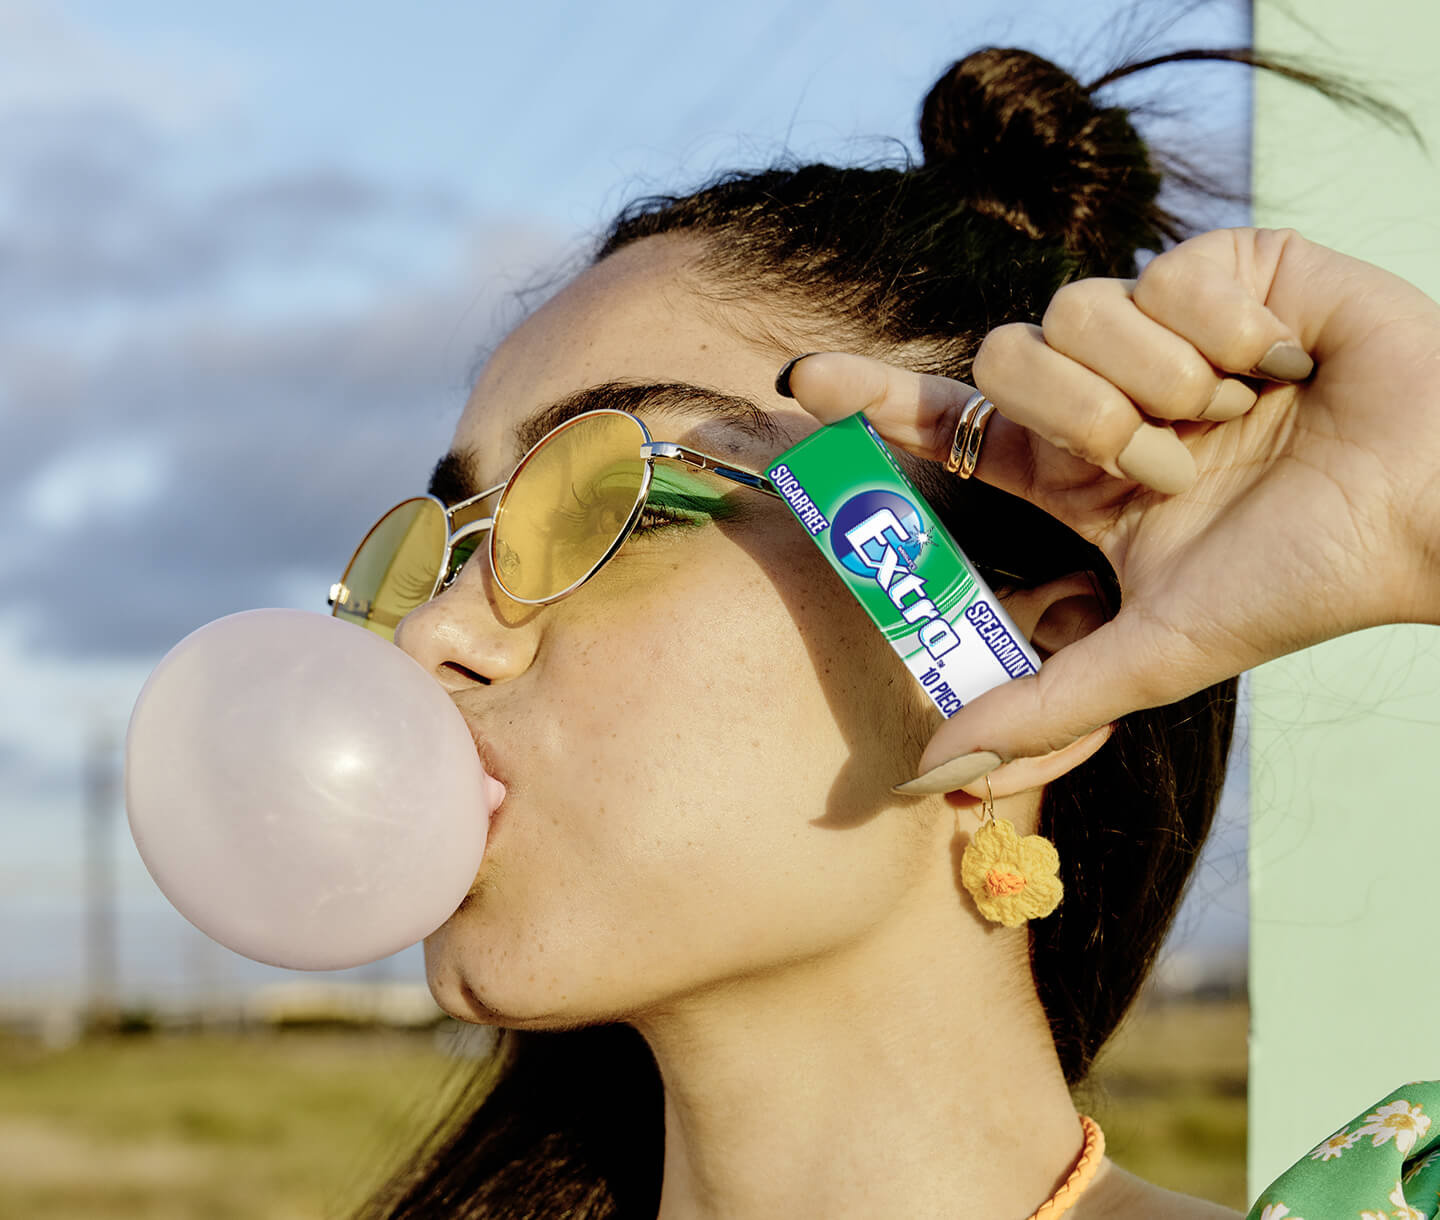 Girl blowing bubble and holding EXTRA packet